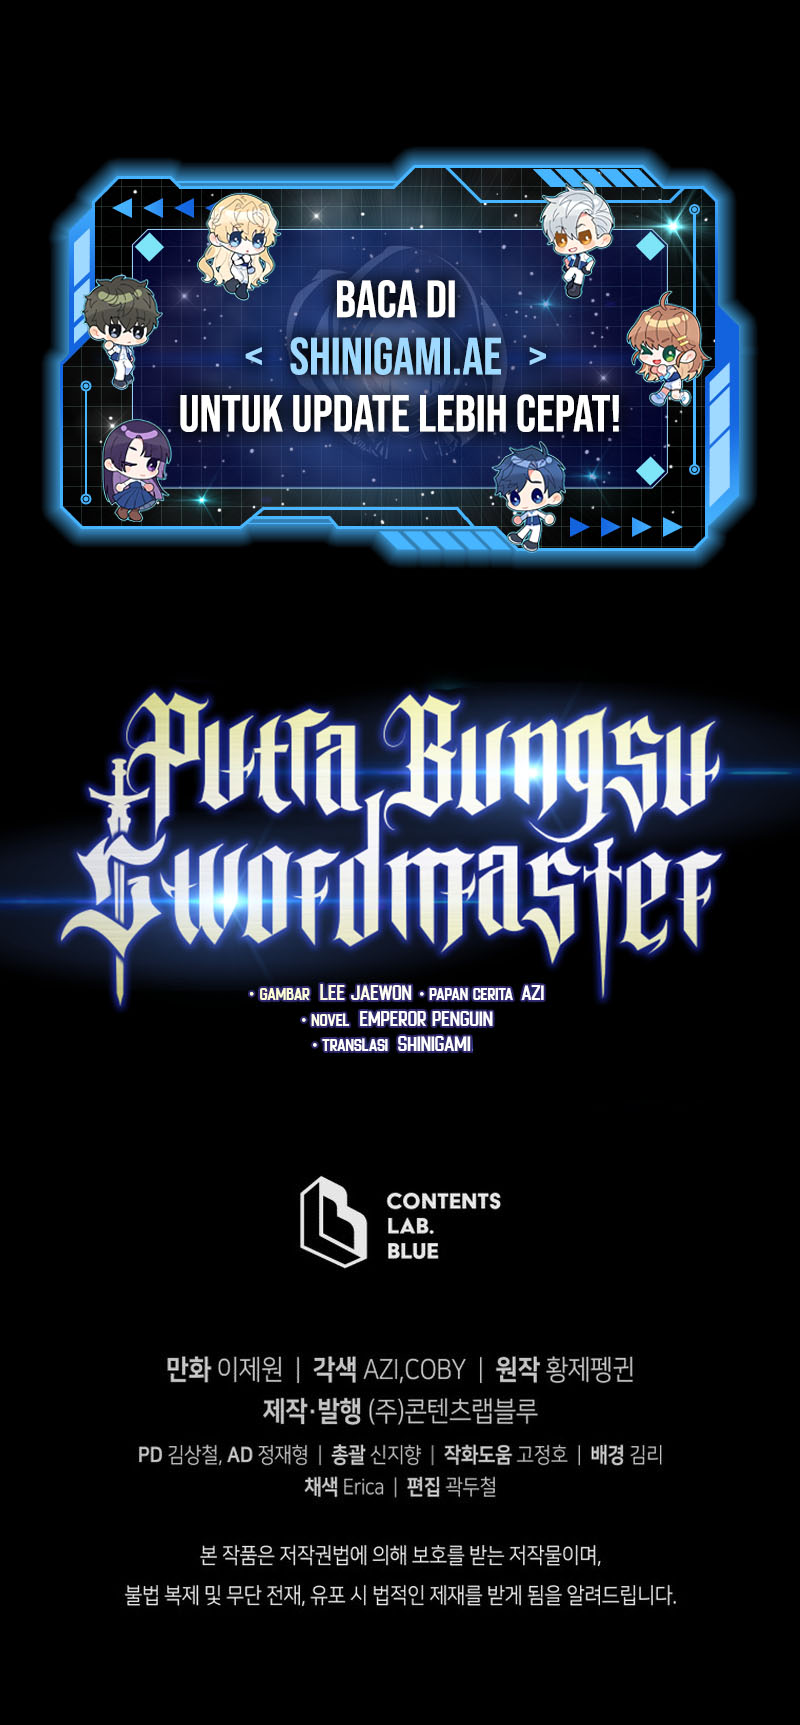 swordmasters-youngest-son-112a Chapter 94